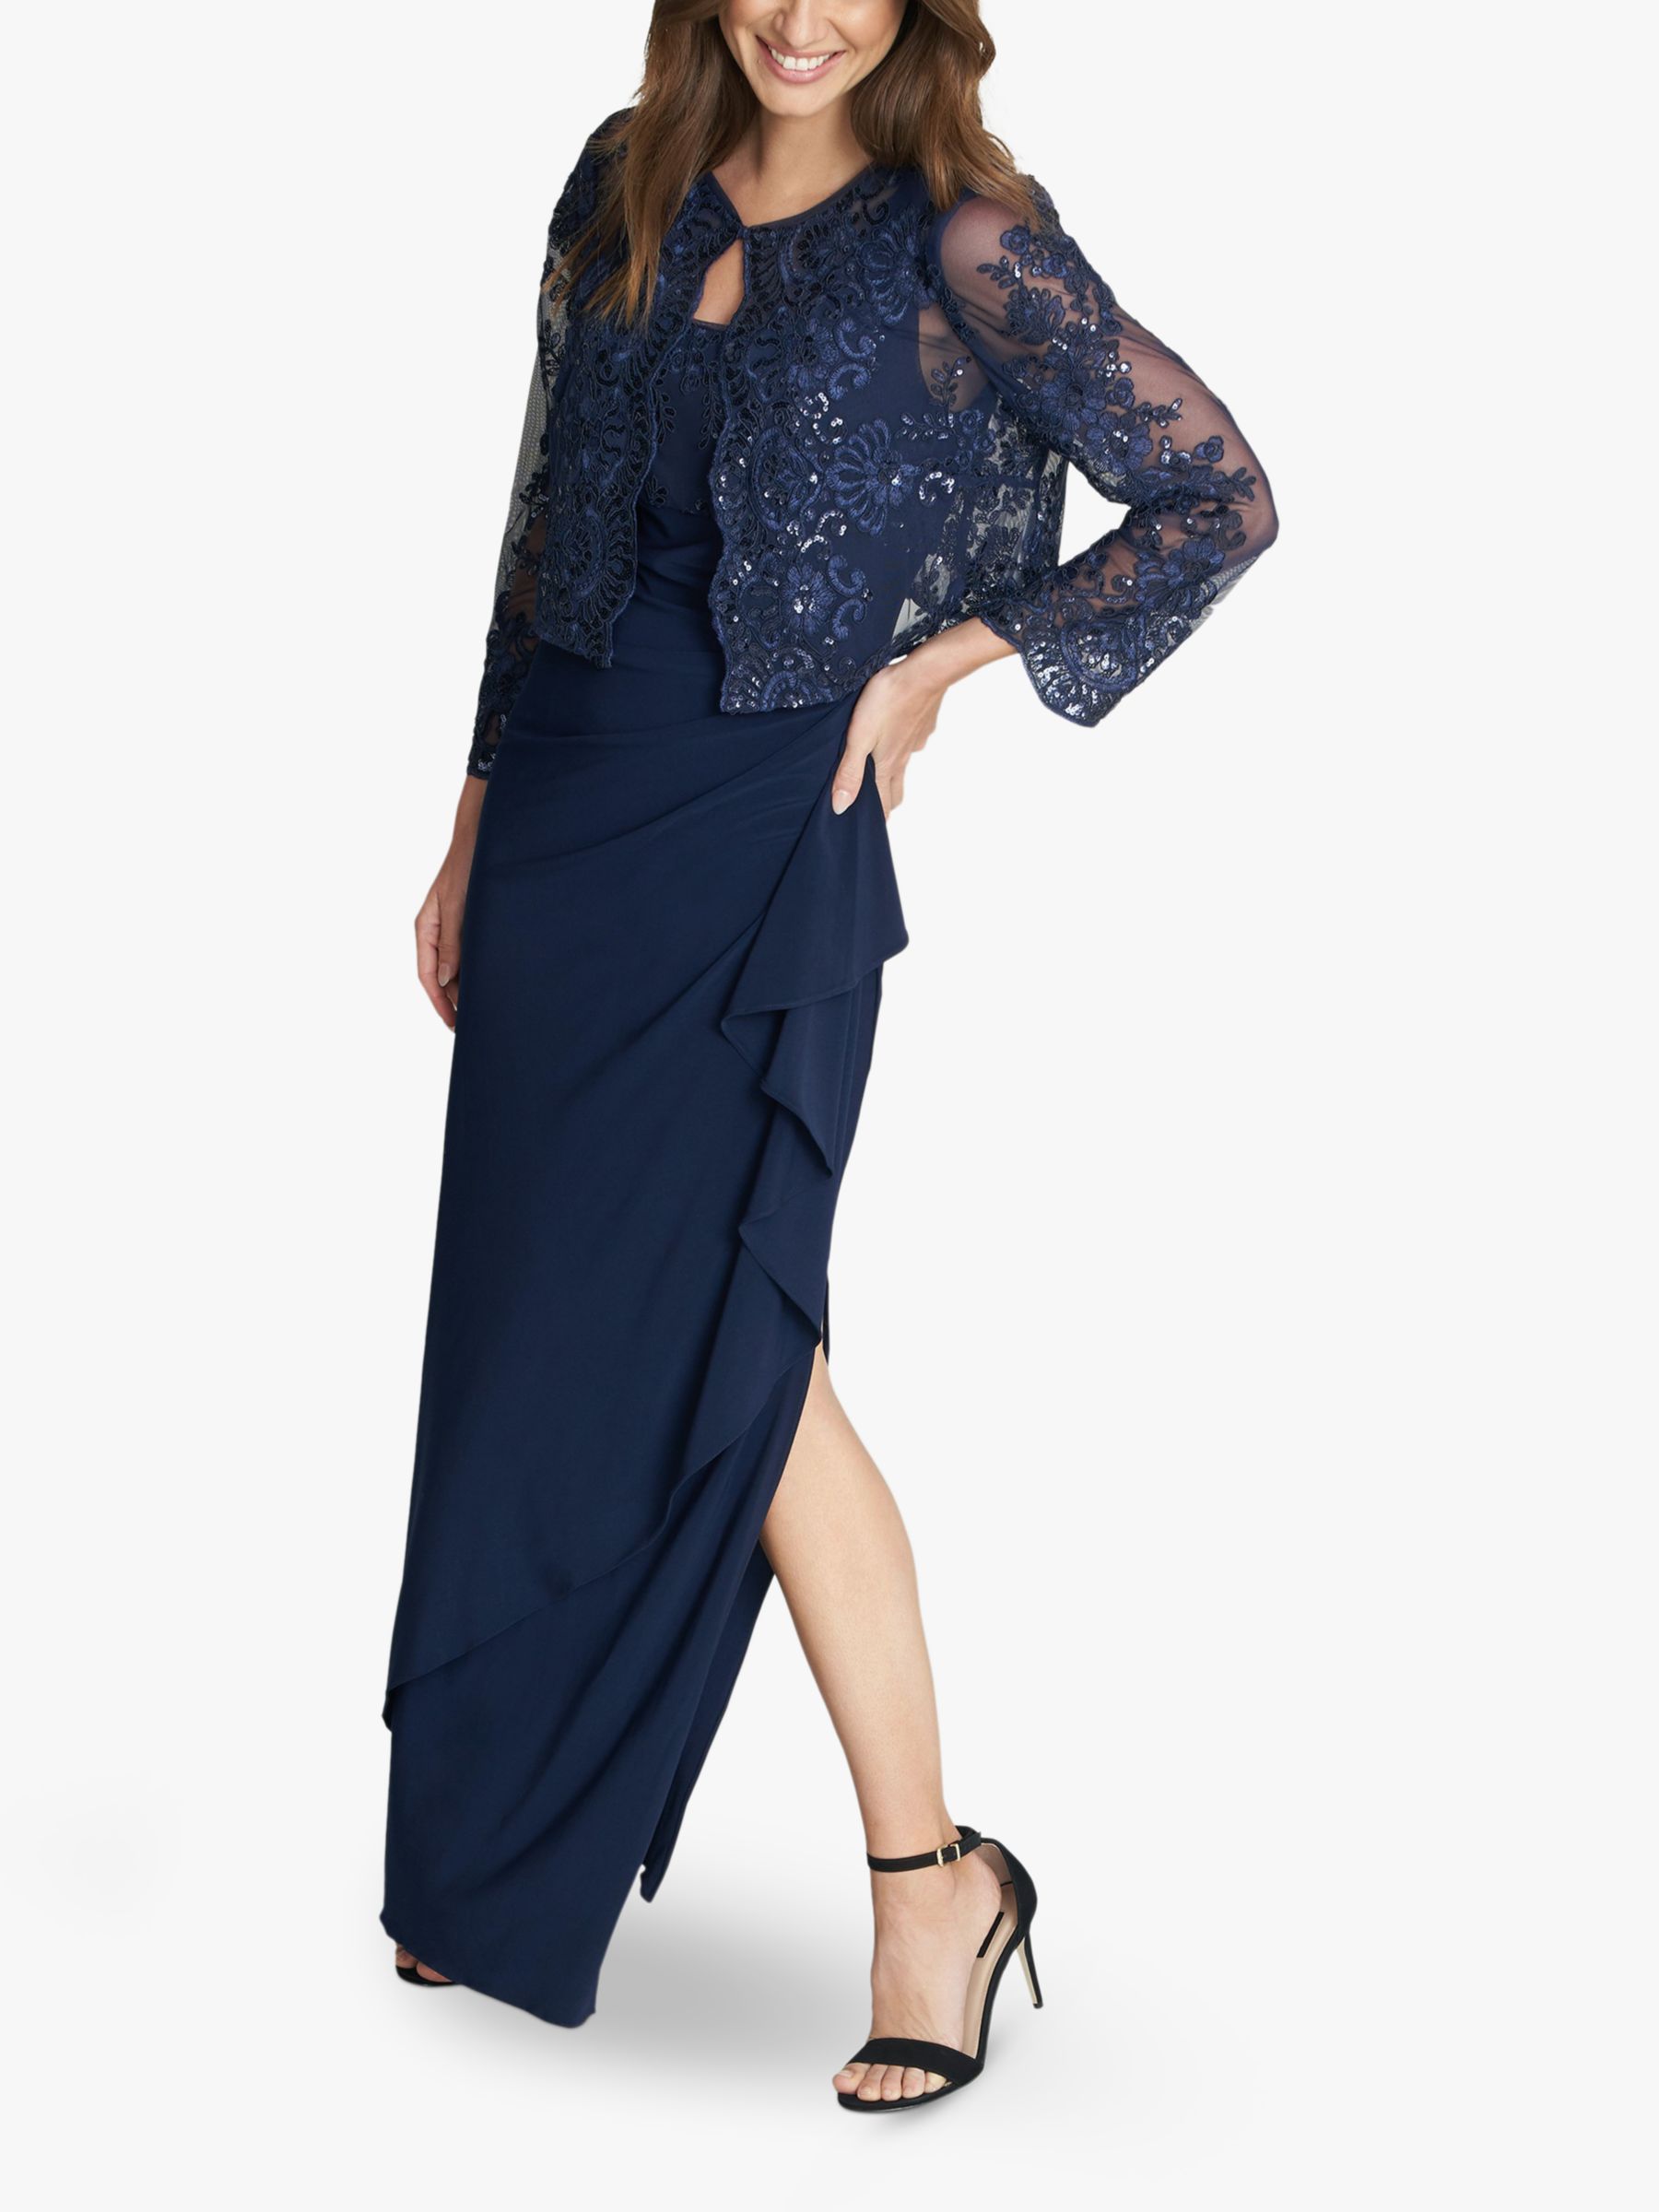 Buy Gina Bacconi Meridith Embroidered Lace Detail Maxi Dress and Jacket, Navy Online at johnlewis.com